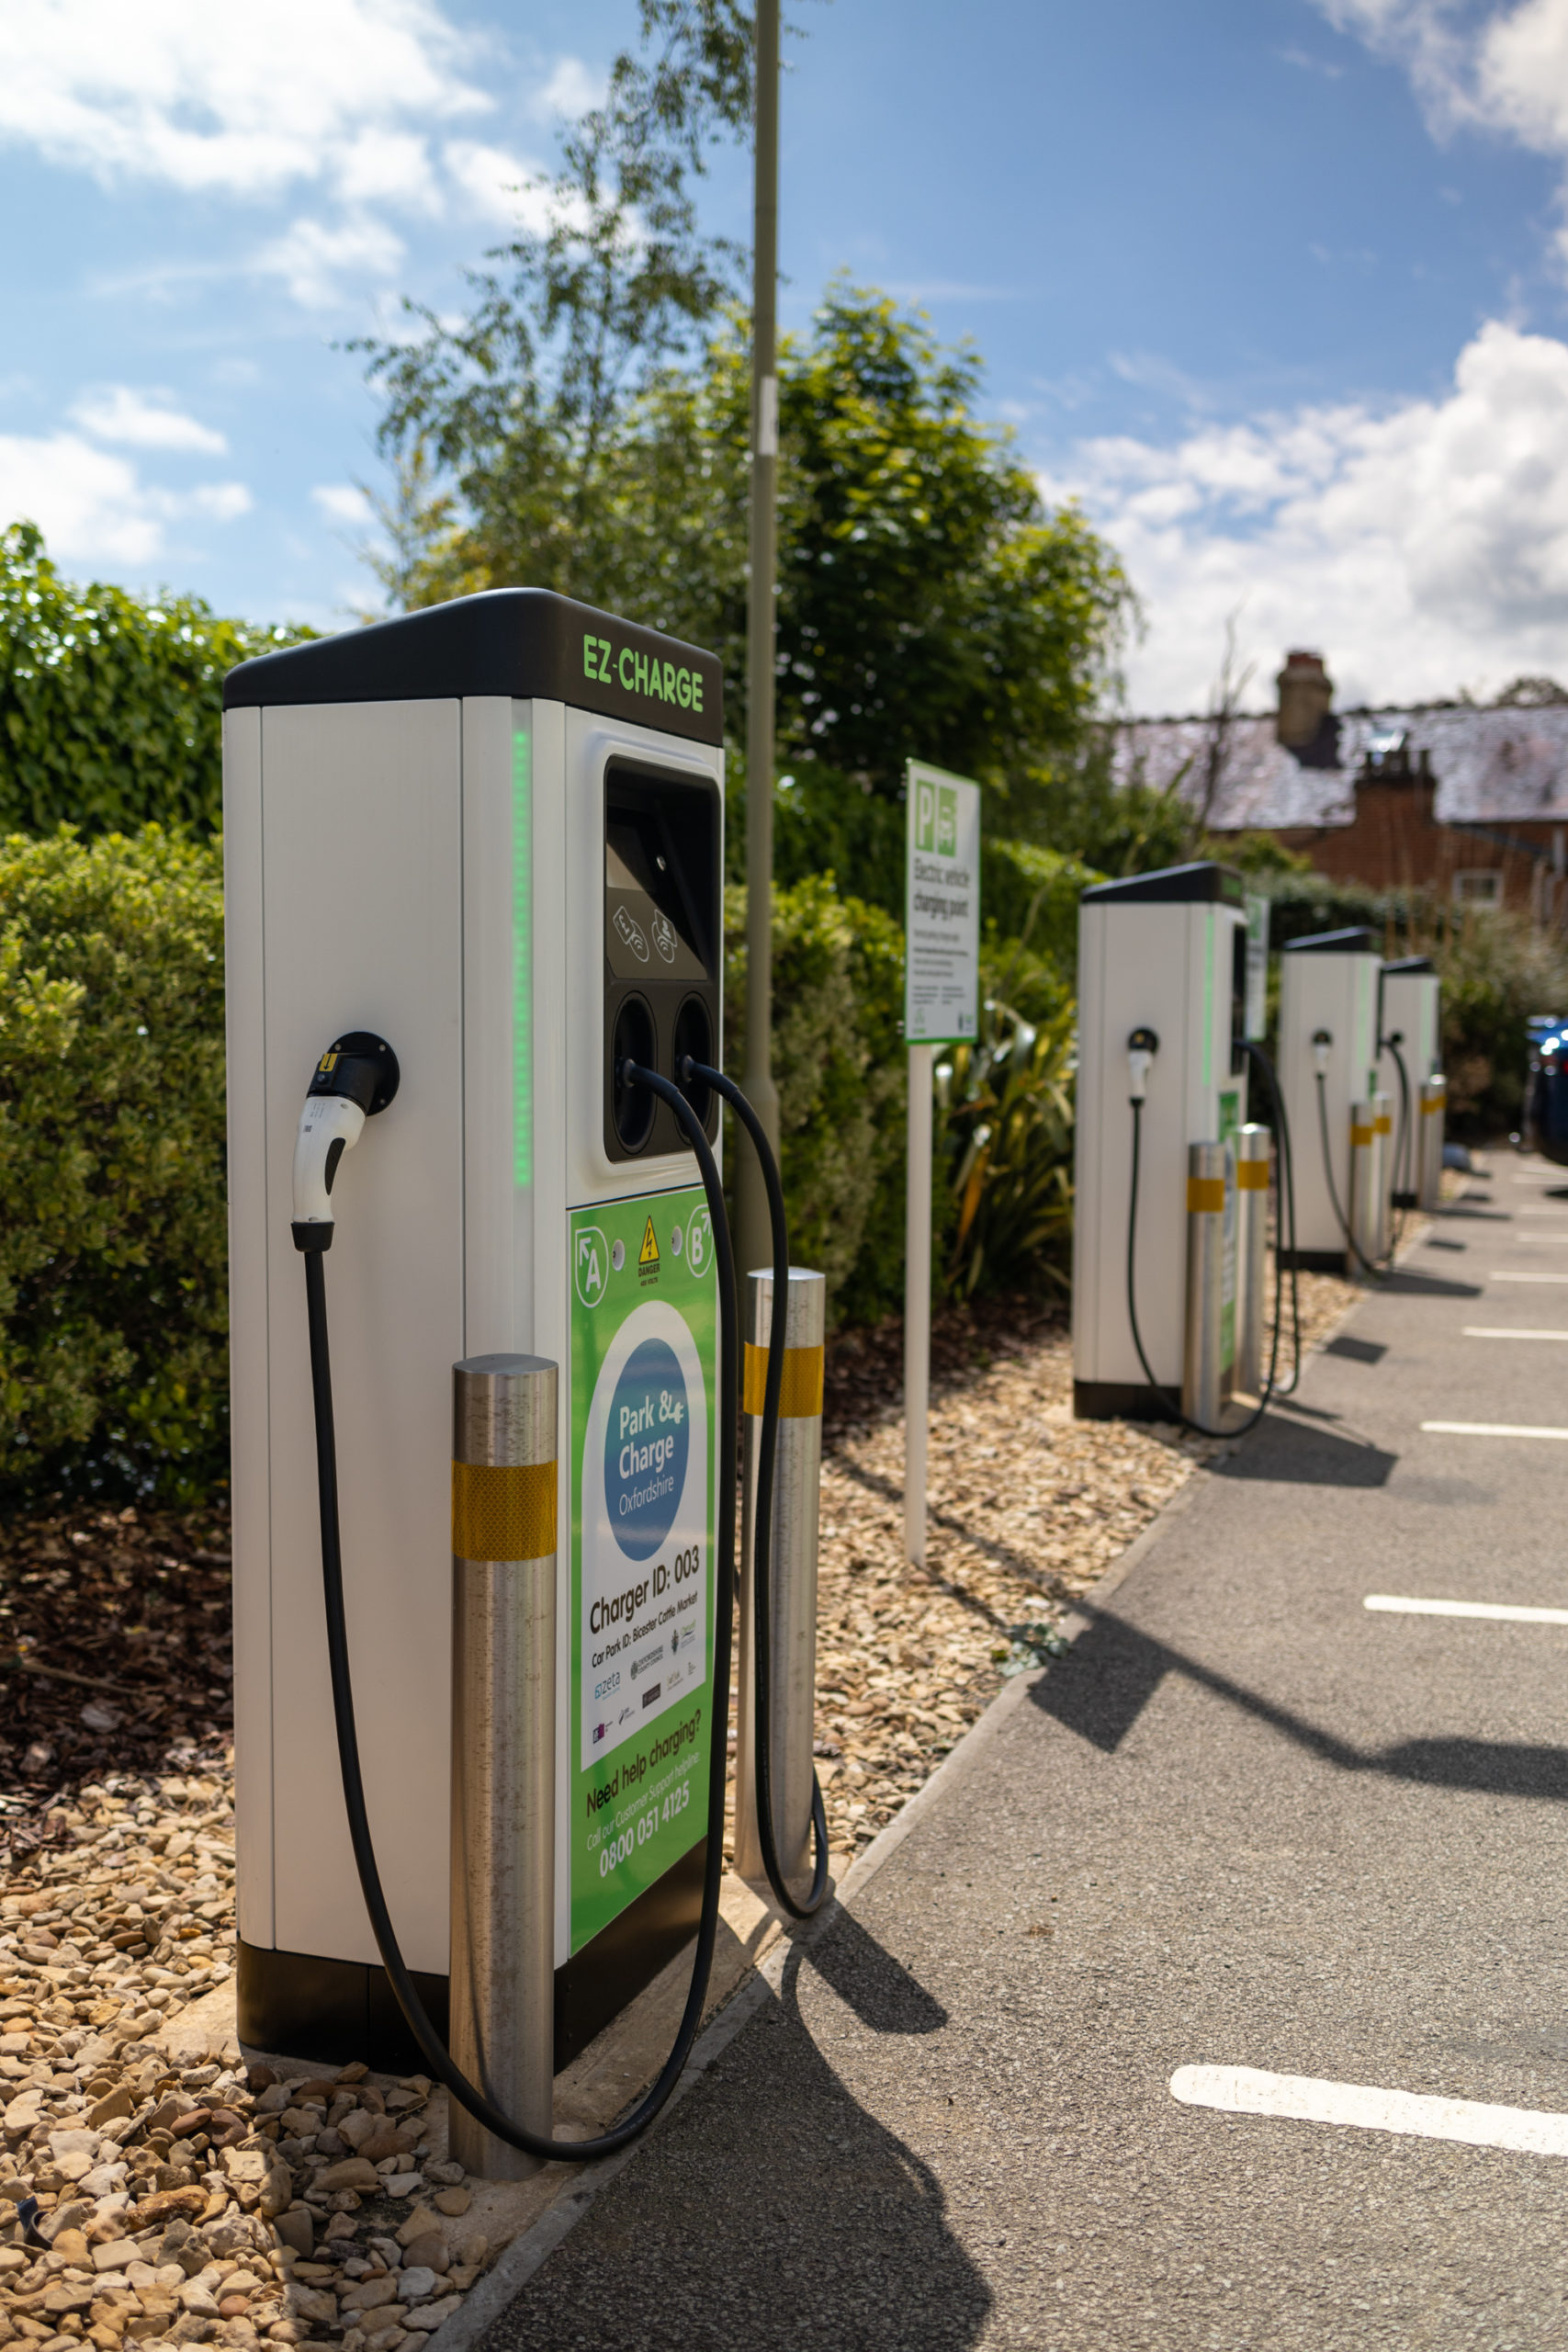 The latest wave of electric vehicle chargers coming to county's car parks 